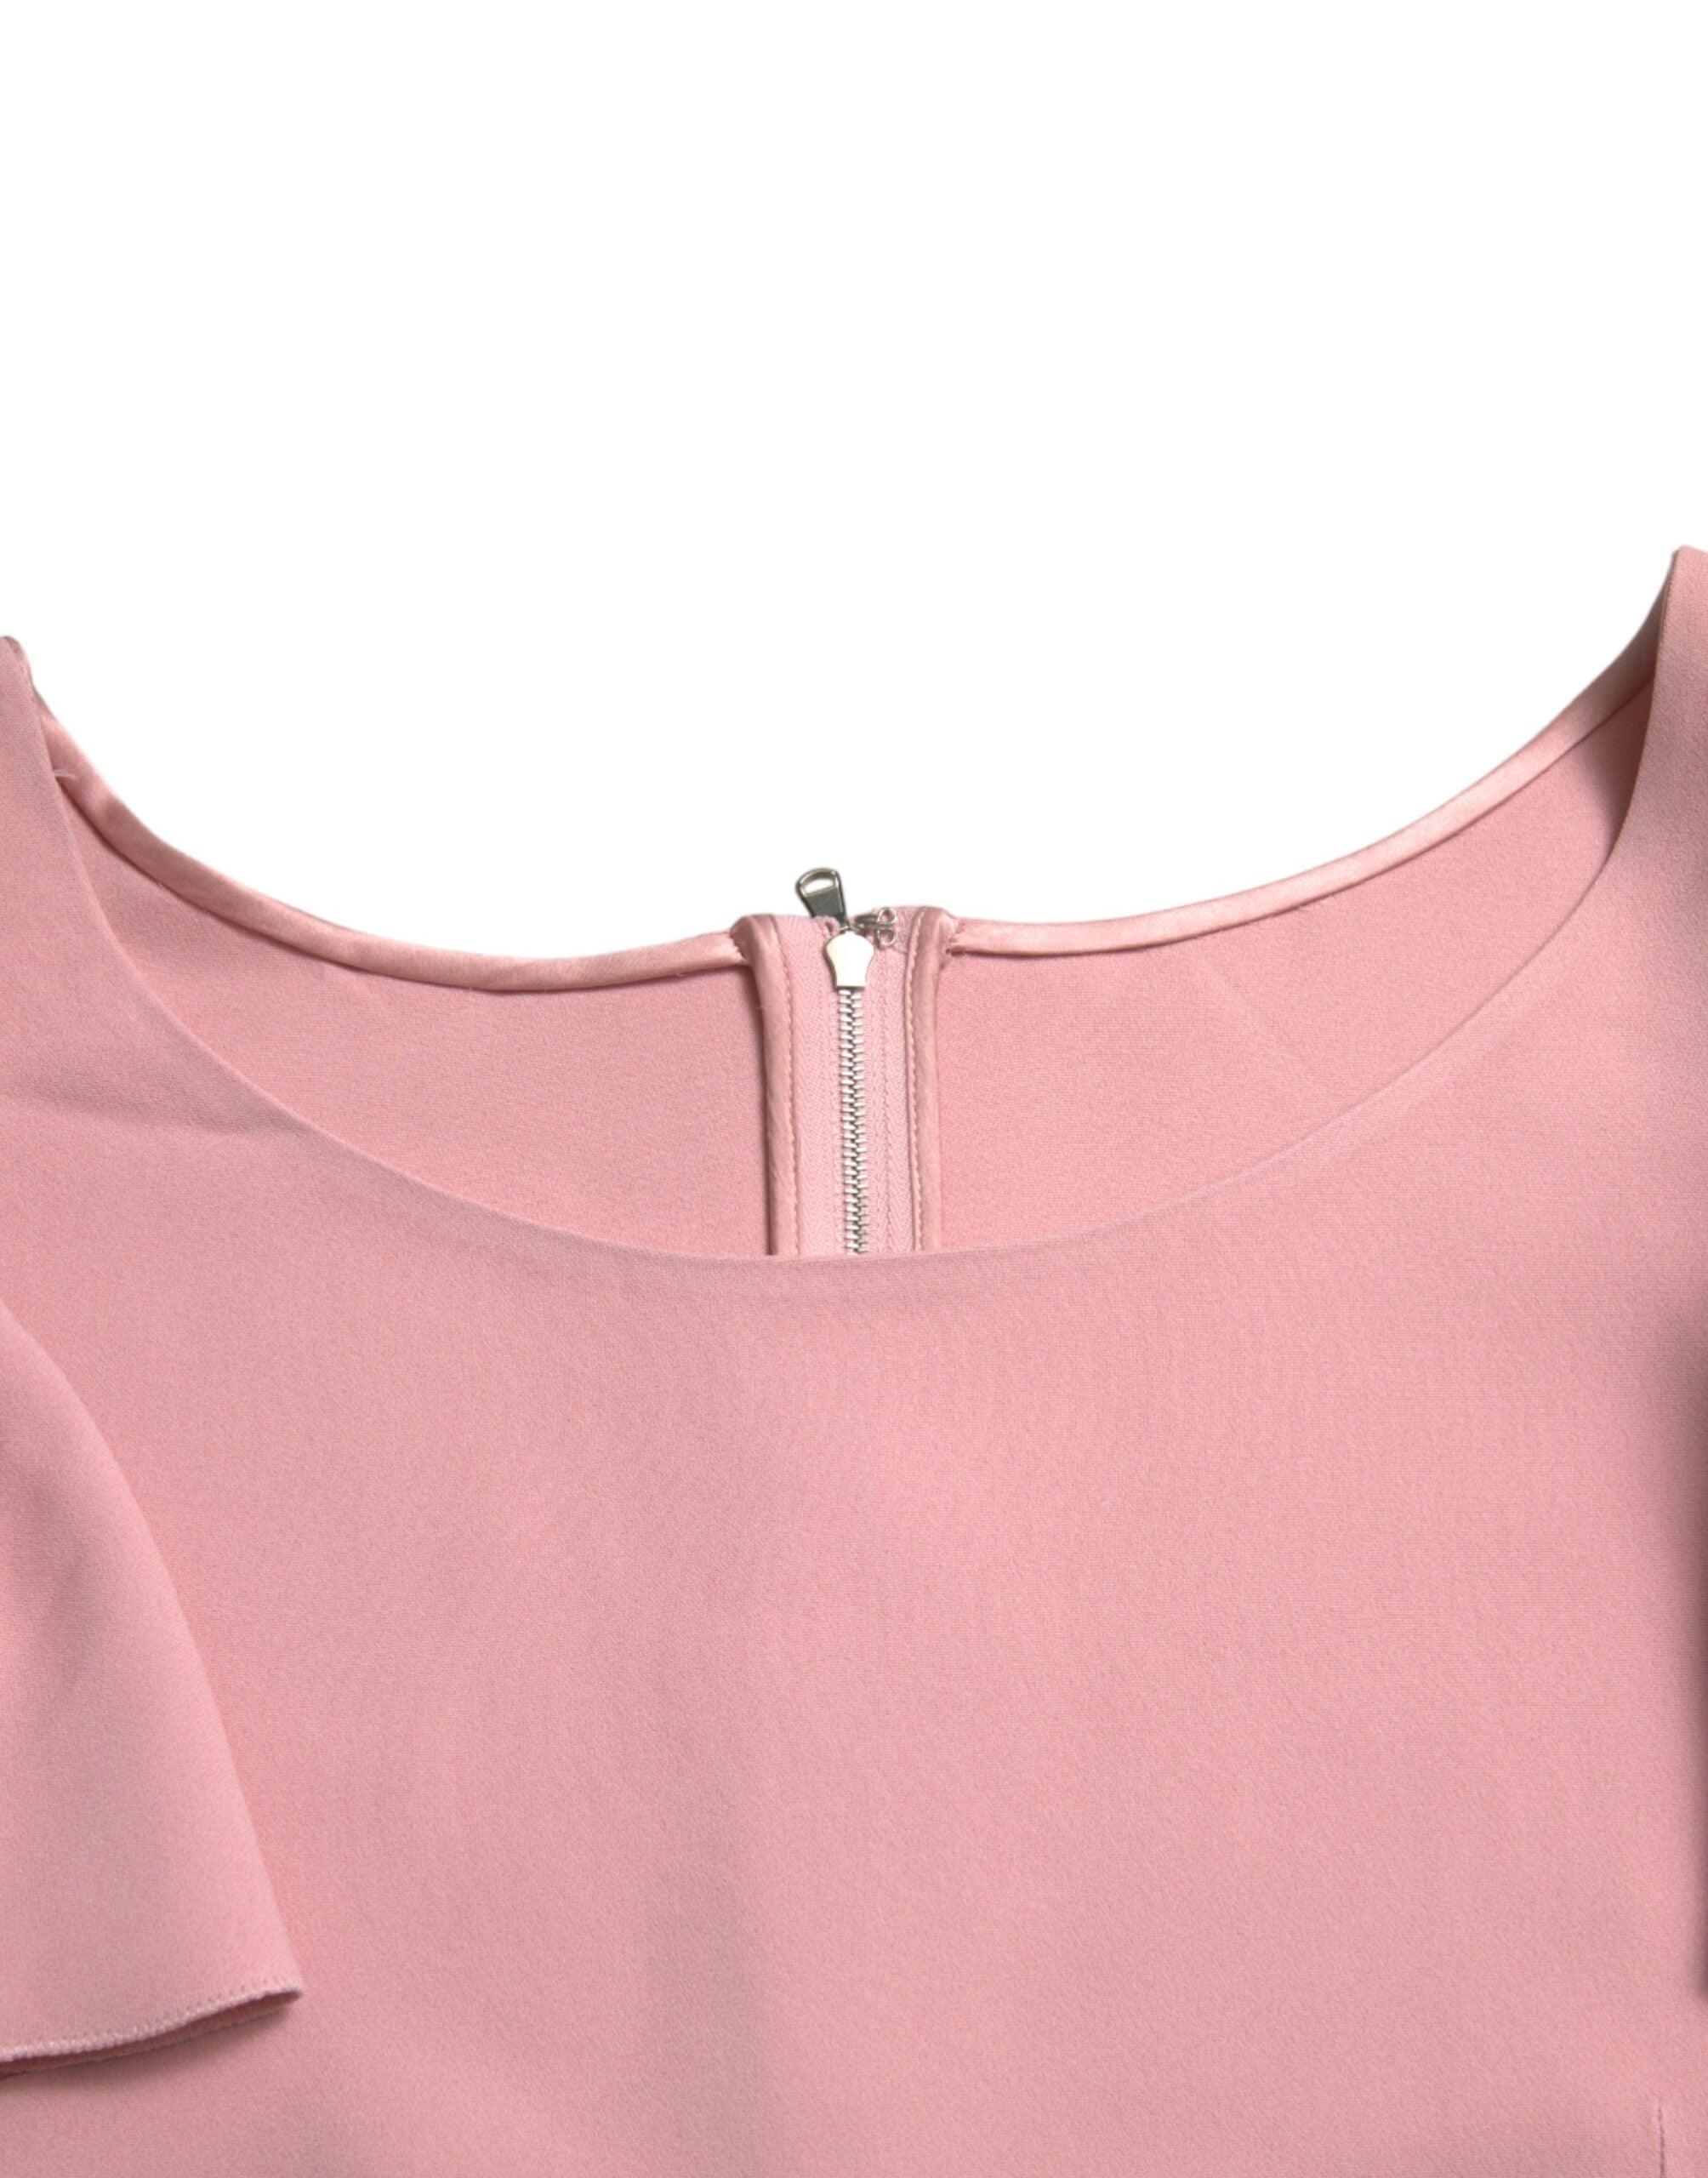 Dolce & Gabbana Chic Pink Bell Sleeve Top